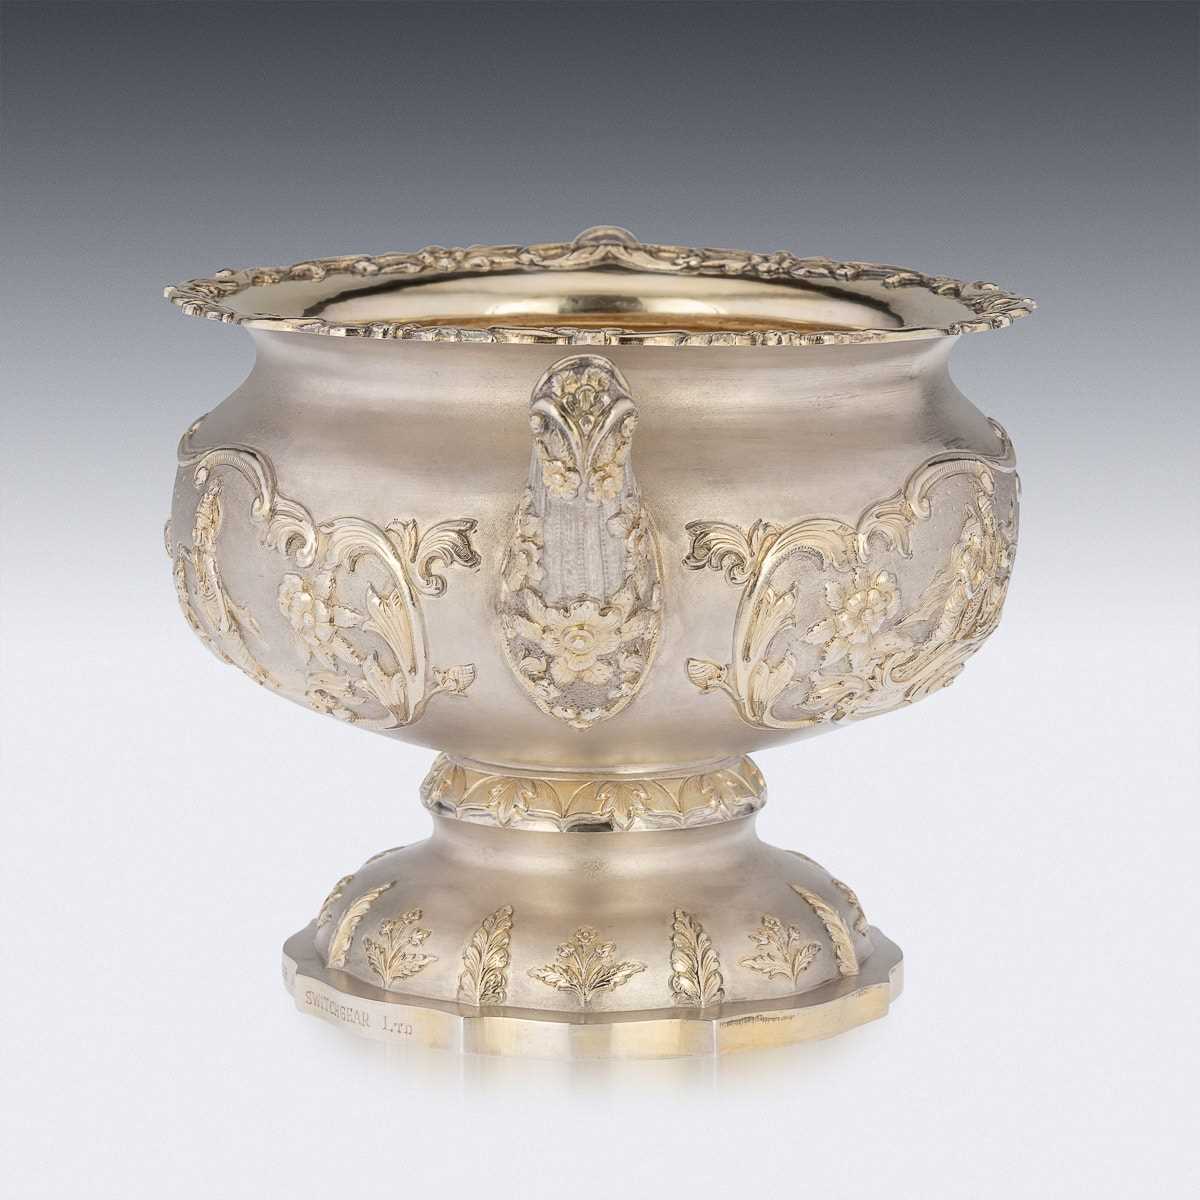 AN EARLY 20TH CENTURY INDIAN SOLID SILVER BOWL, CALCUTTA c.1910 - Image 3 of 22